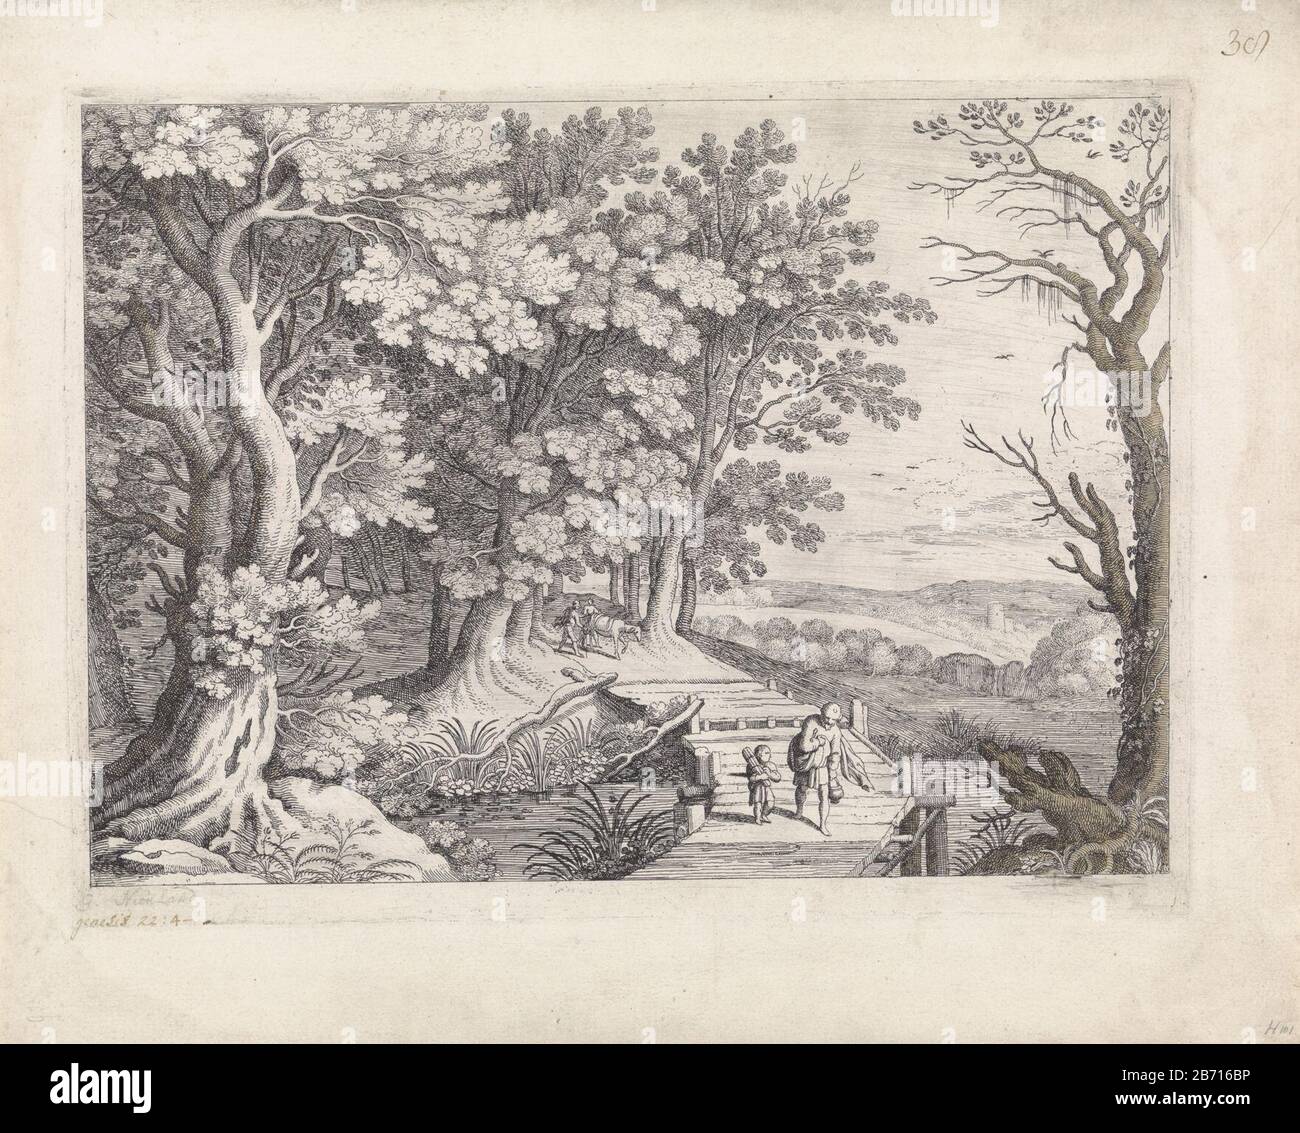 Landschap met Abraham en Isaak Italiaanse landschappen (serietitel) Abraham and Isaac carrying the wood, walking on a wooden bridge in a wooded hilly landscape to the place of sacrifice. The two servants and the donkey they have left behind. Print out a series of Italian landschappen. Manufacturer : printmaker Willem van Nieulandt (II) designed by Paul Bril Date: 1594 - 1635 Physical features: etching and brush in brown; proofing material: paper Technique: etching / brush dimensions: plate edge: H 234 mm × W 316 mm Subject: the servants are left behind while Abraham and Isaac (usually carrying Stock Photo